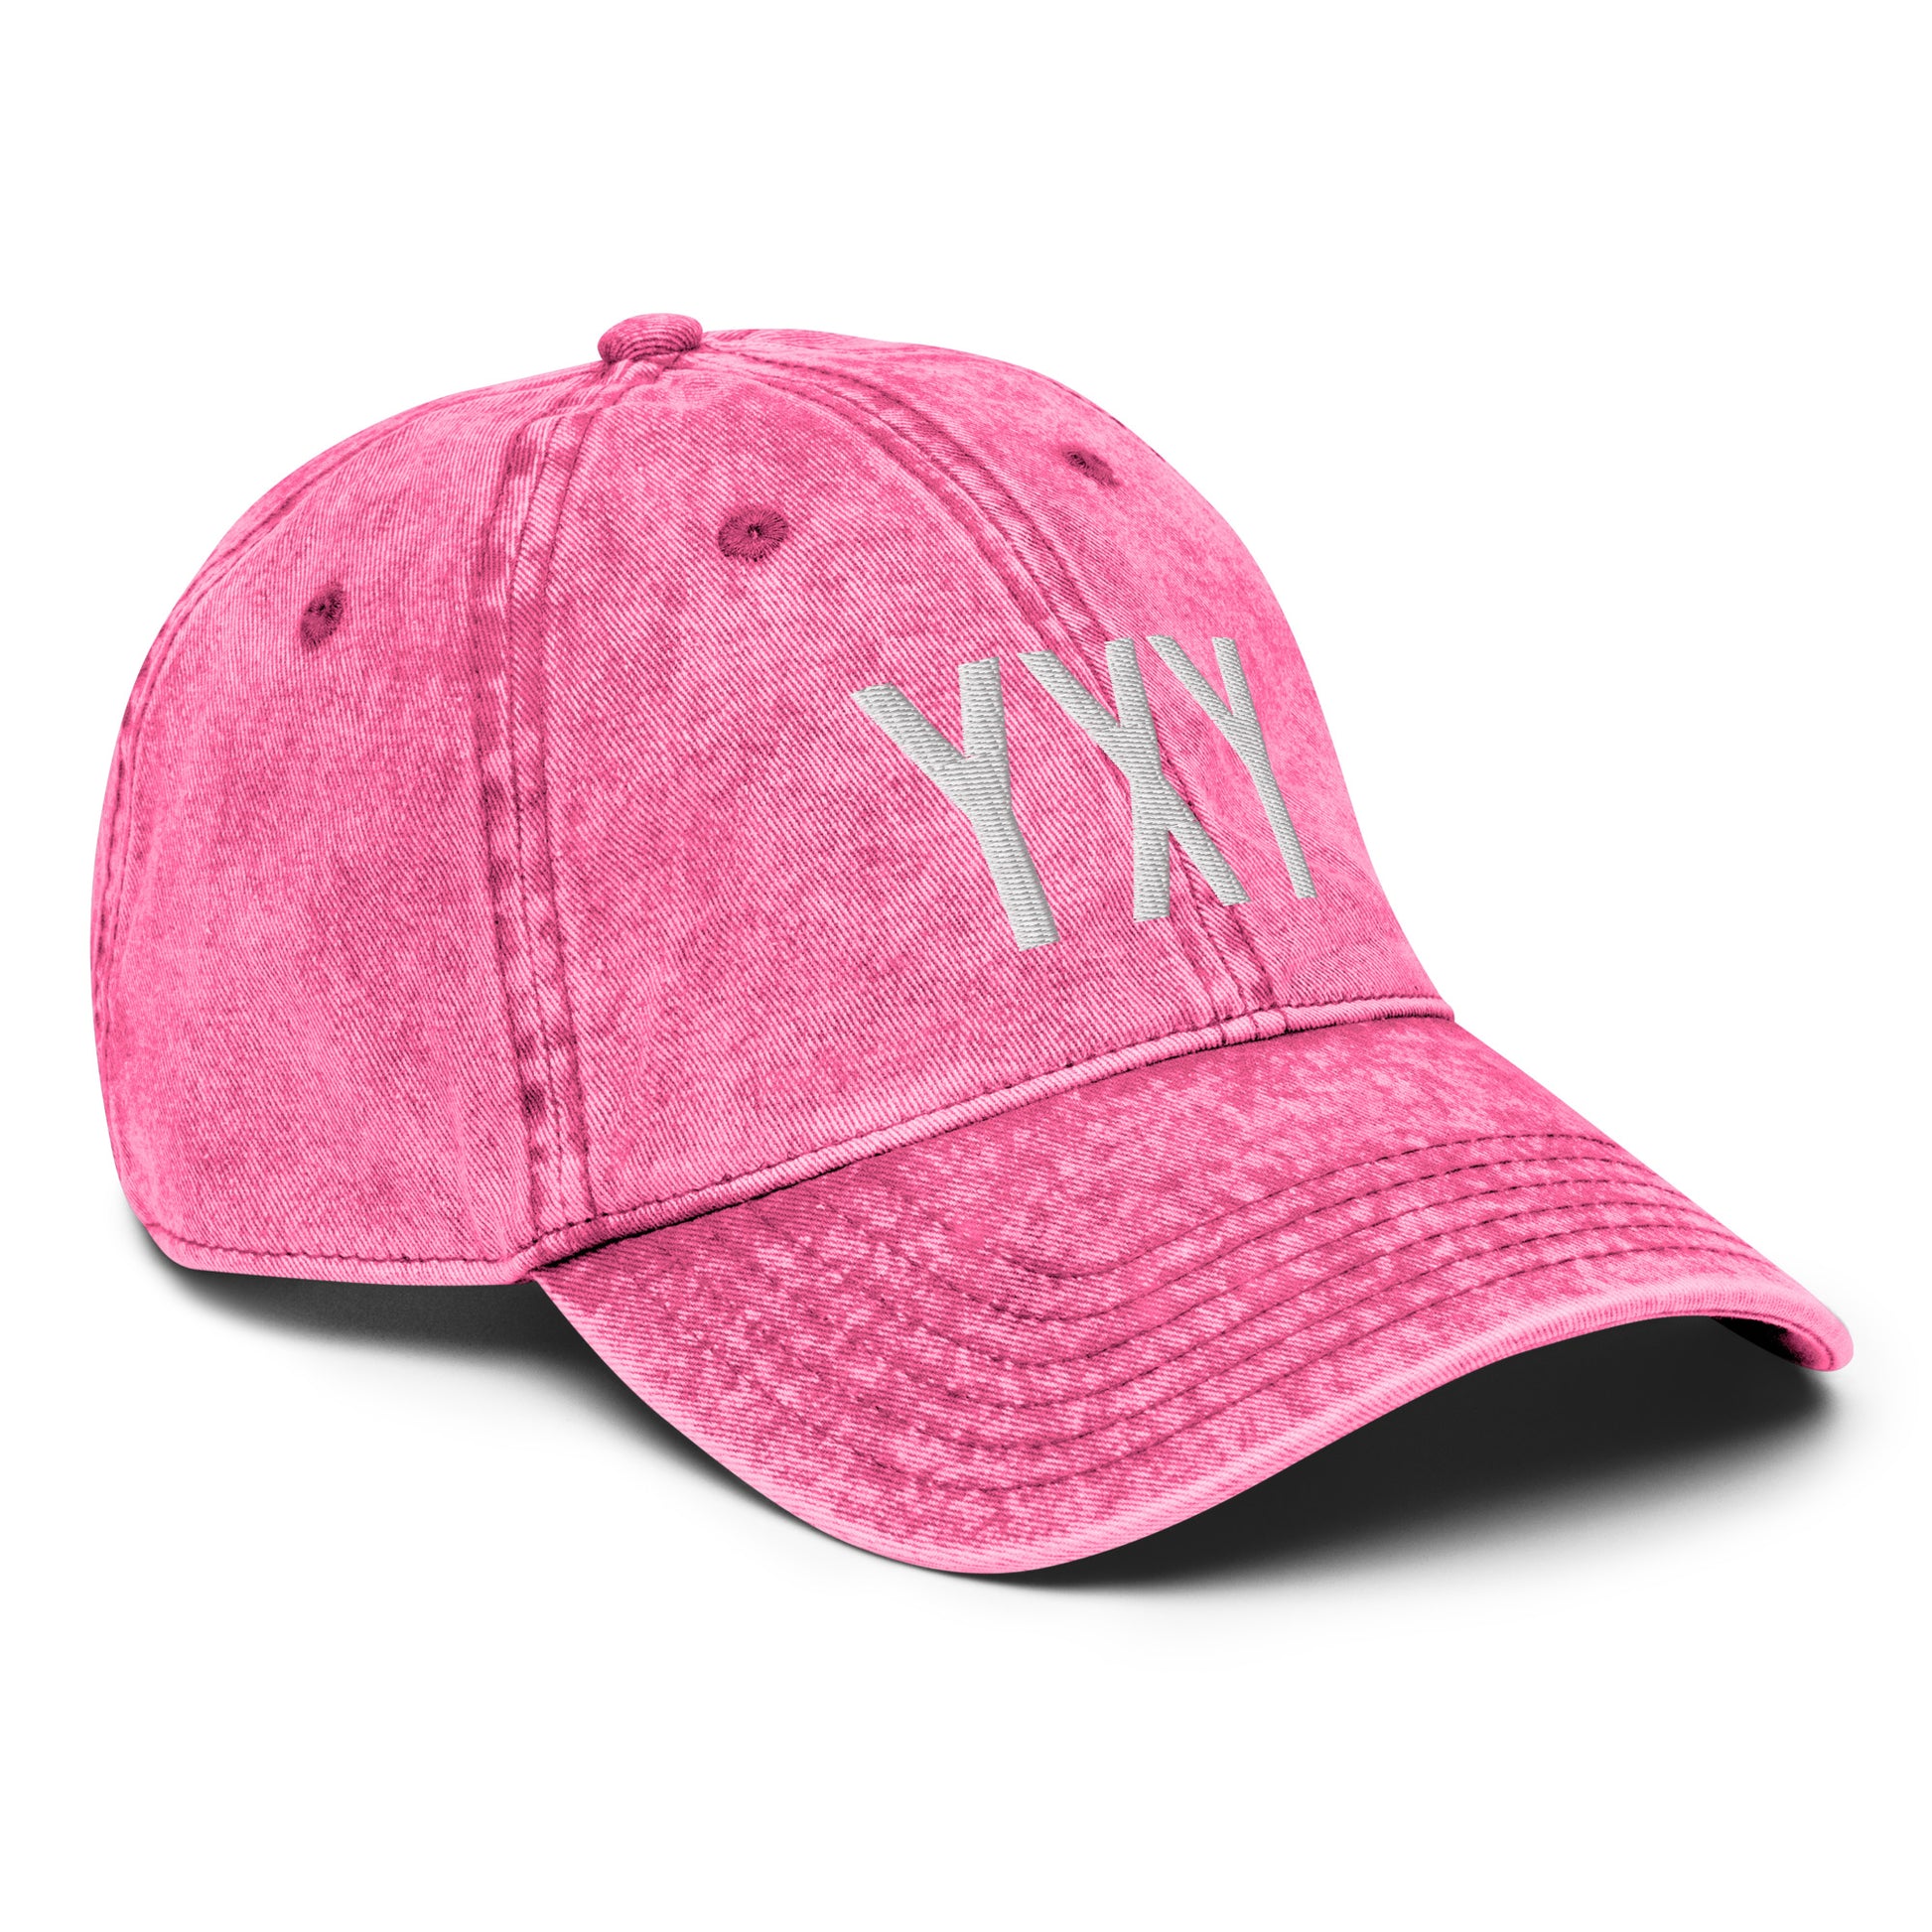 Airport Code Twill Cap - White • YXY Whitehorse • YHM Designs - Image 27